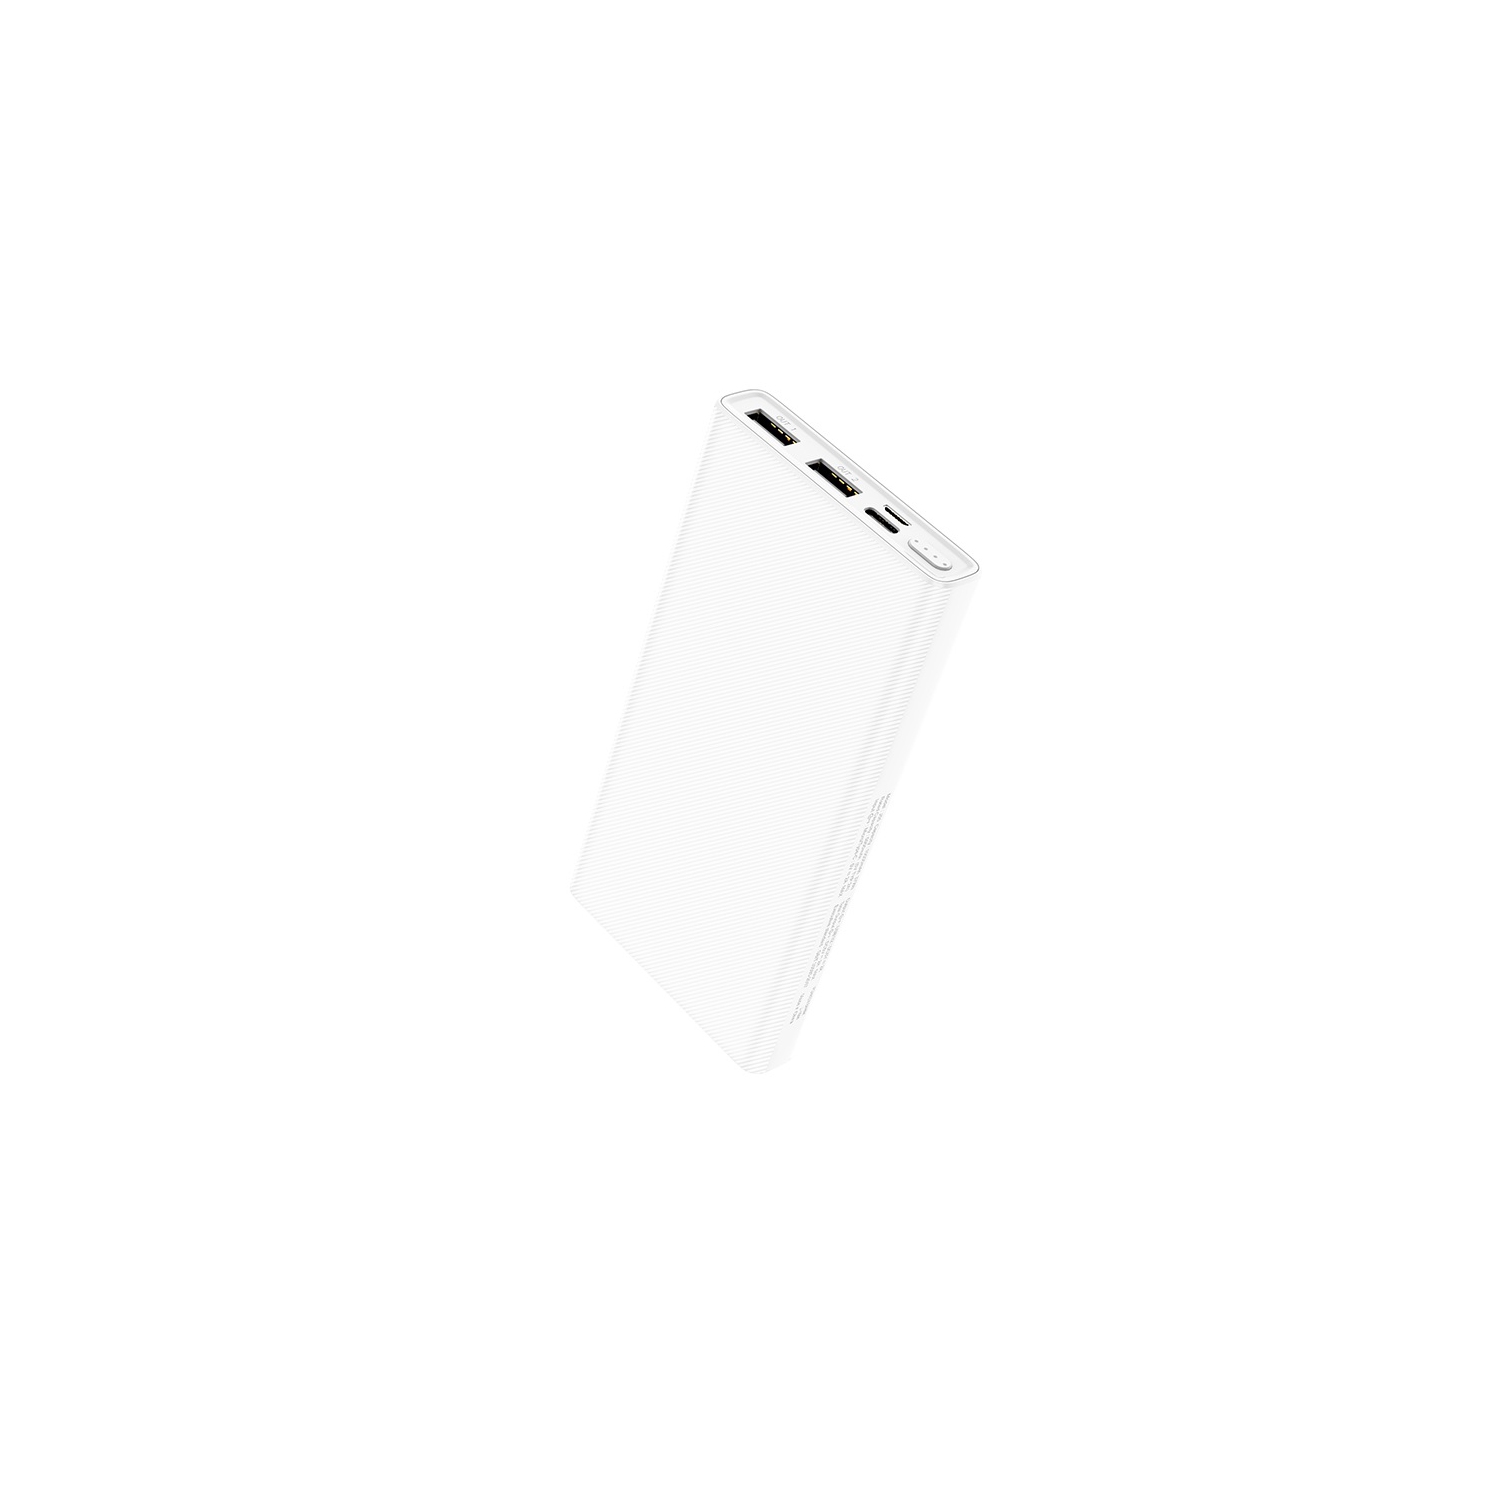 10000mAh Micro USB USB-C External Battery Charger Portable Power Bank for iPhone Samsung iPad Tablets, White